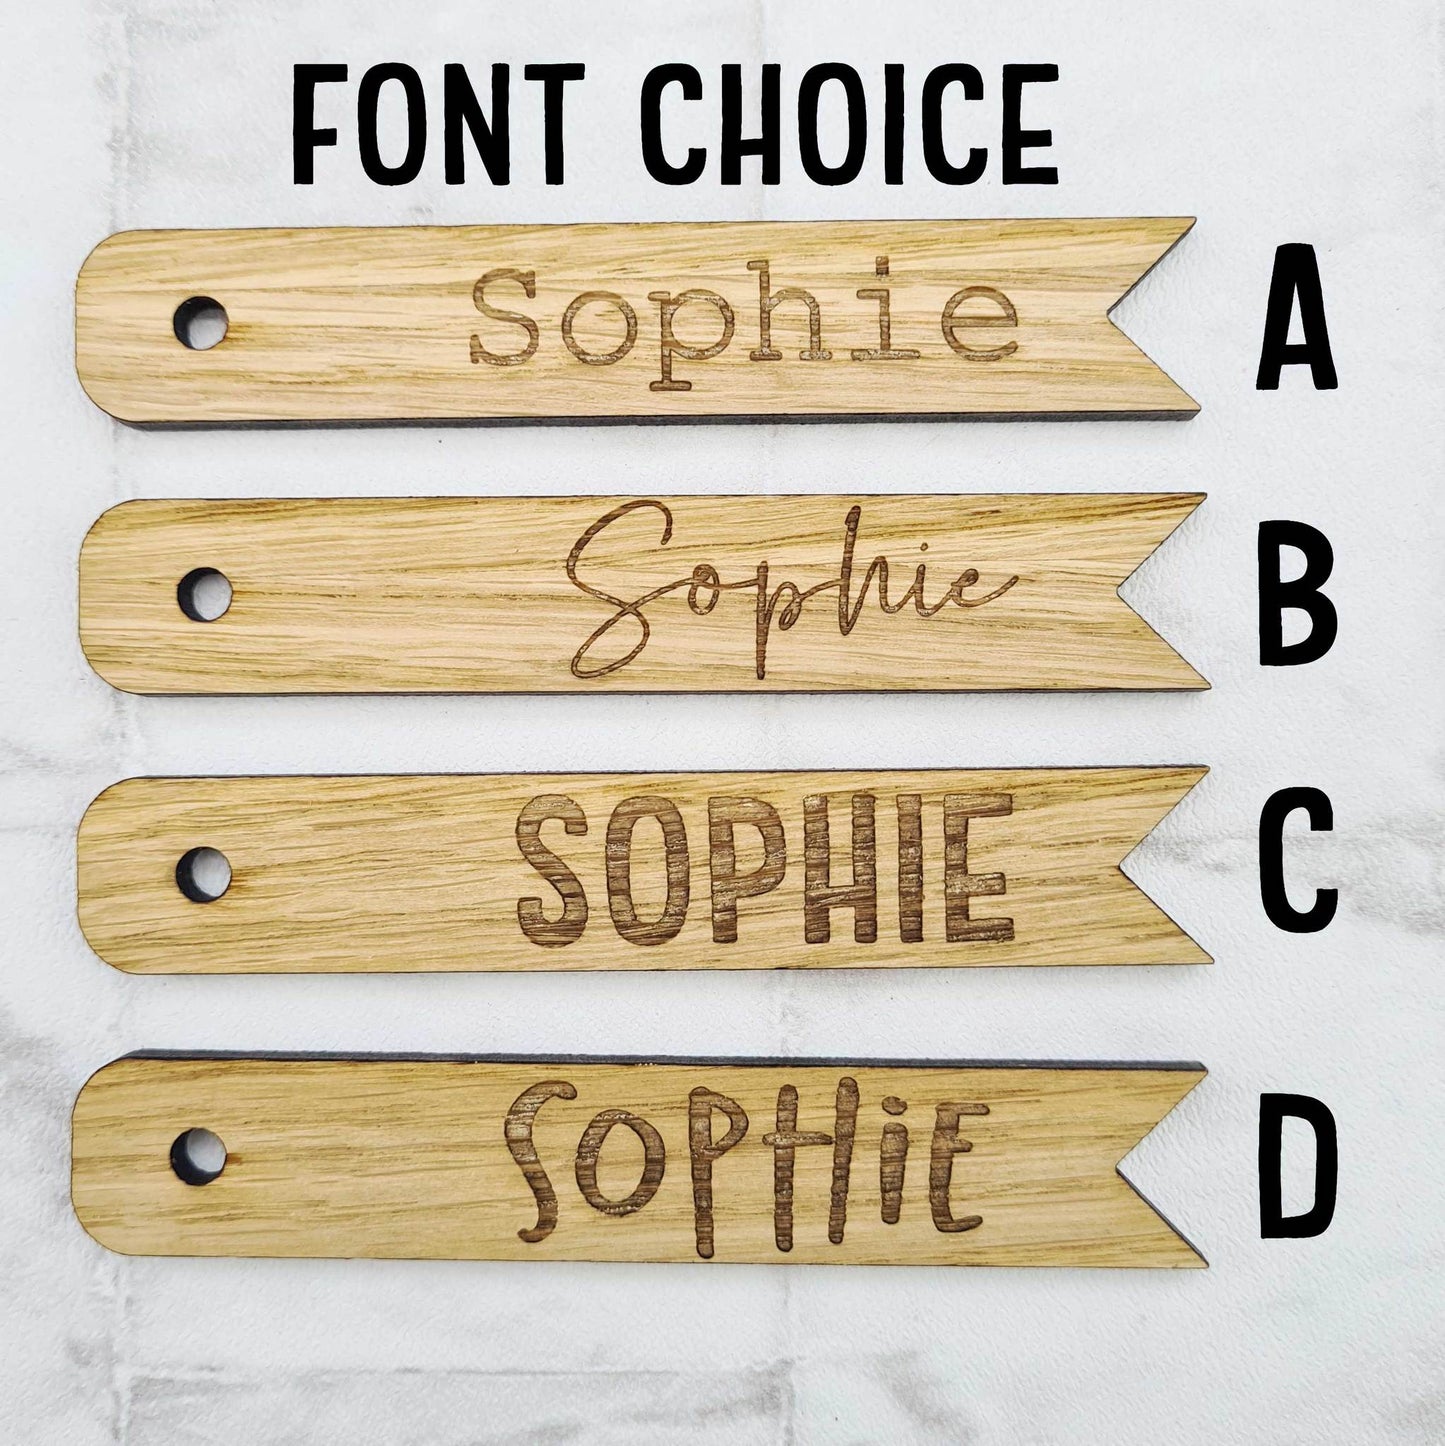 Font choice of the custom wooden gift tags 